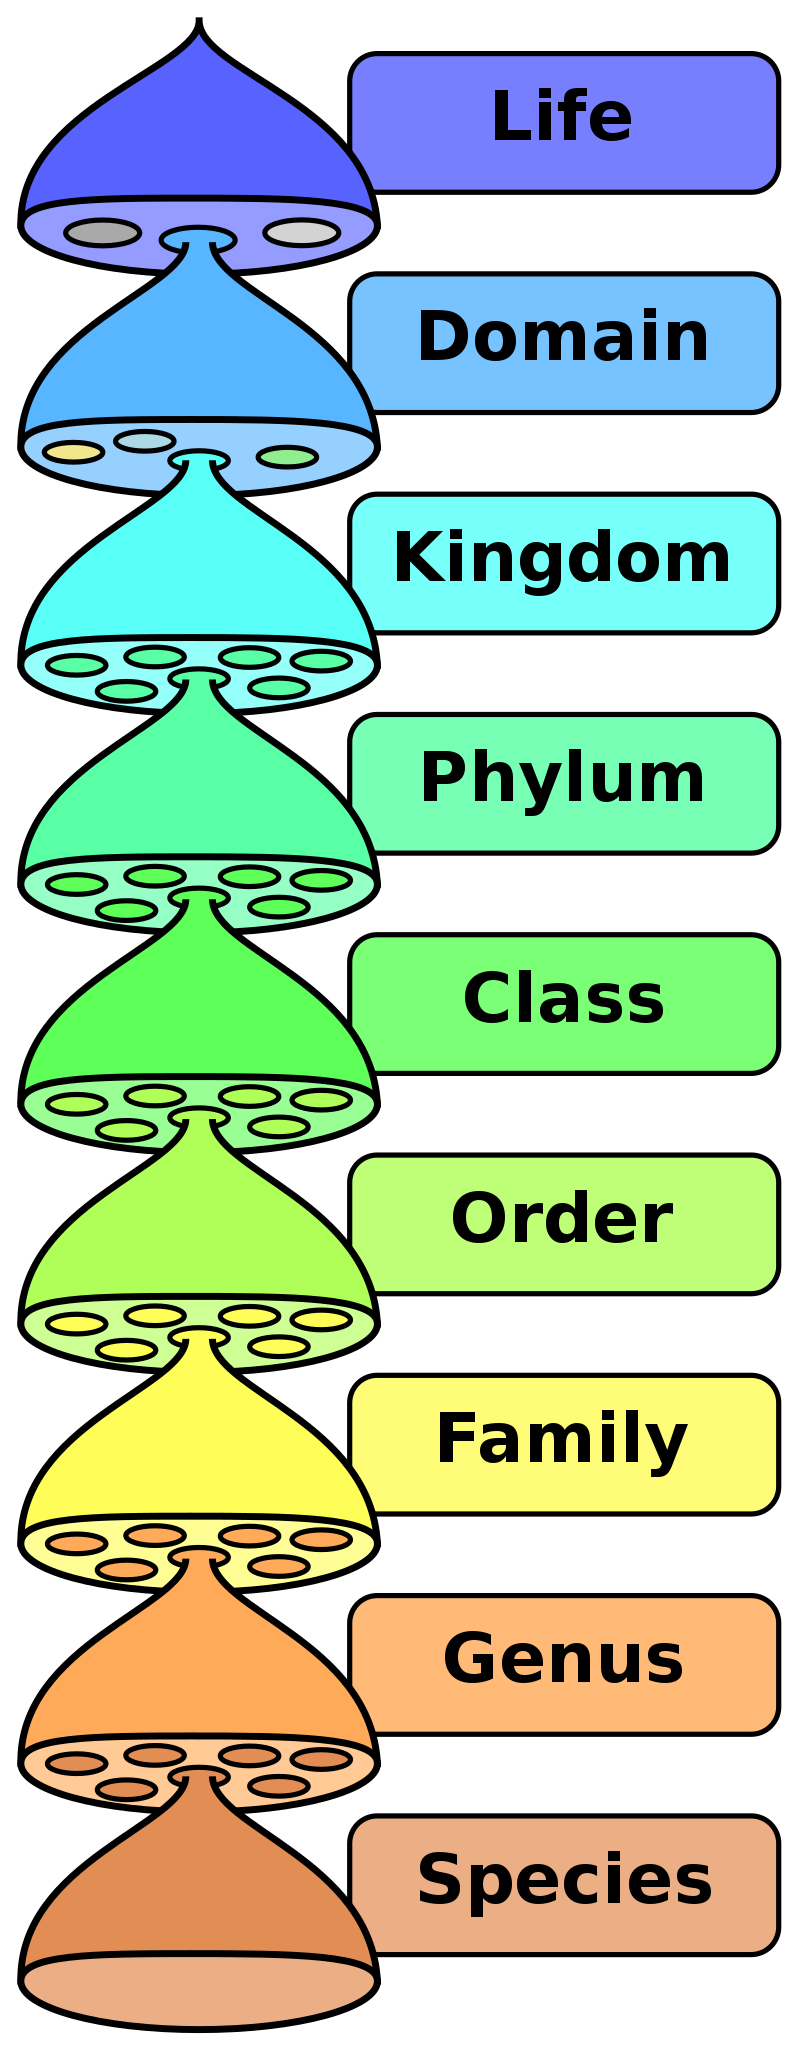 A cartoon showing the taxonomic ranks used in biology. From largest to smallest they are: life, domain, kingdom, phylum, class, order, family, genus, species.